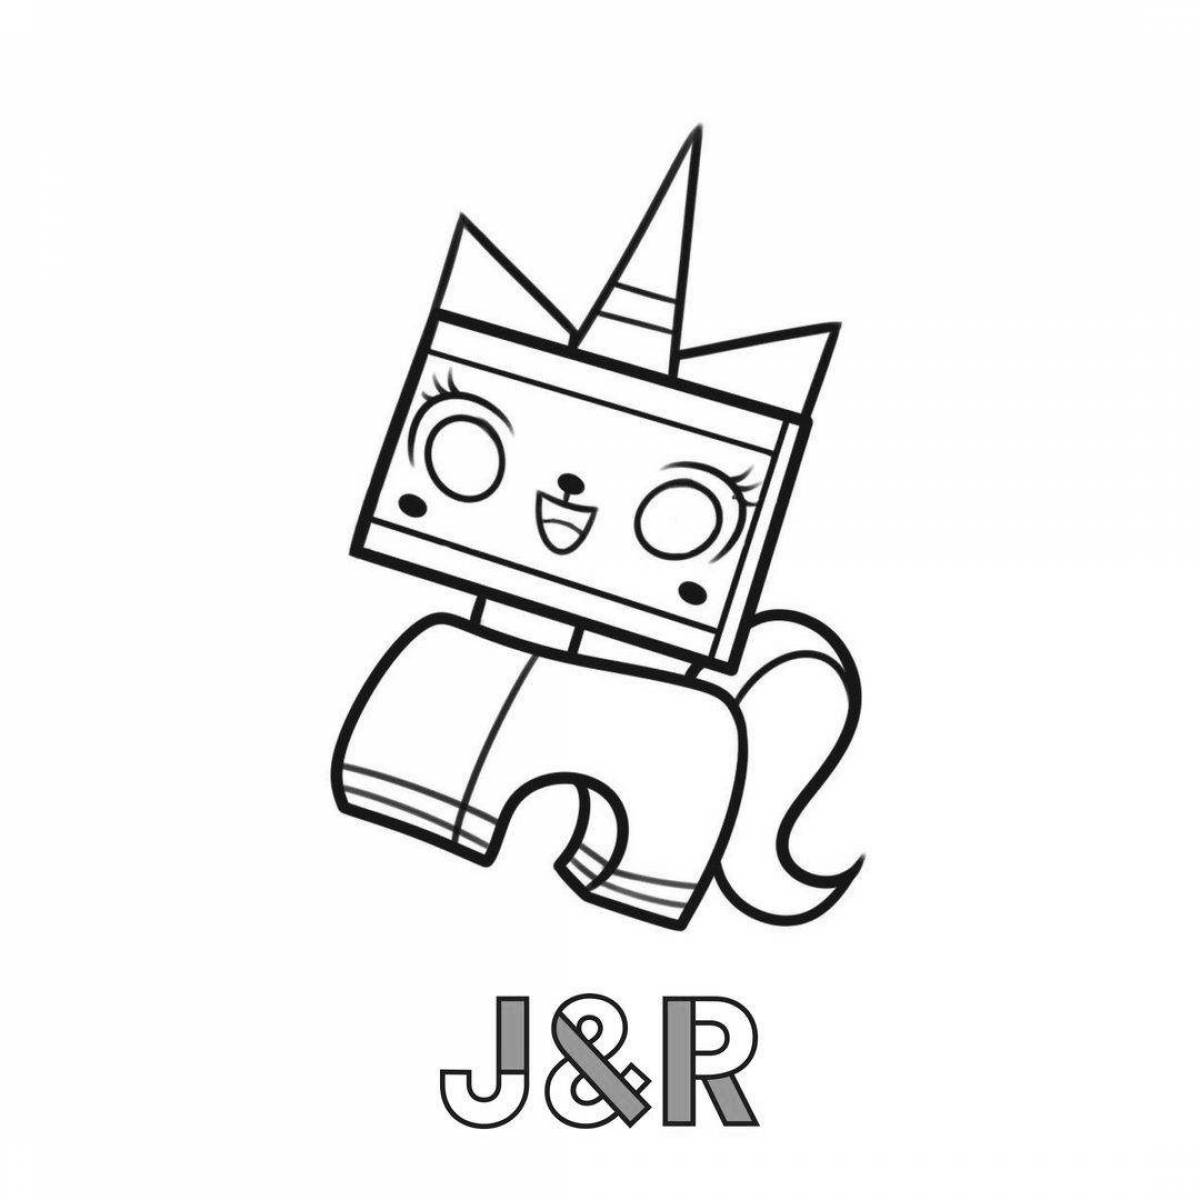 Color-explosion unikitty lego coloring page